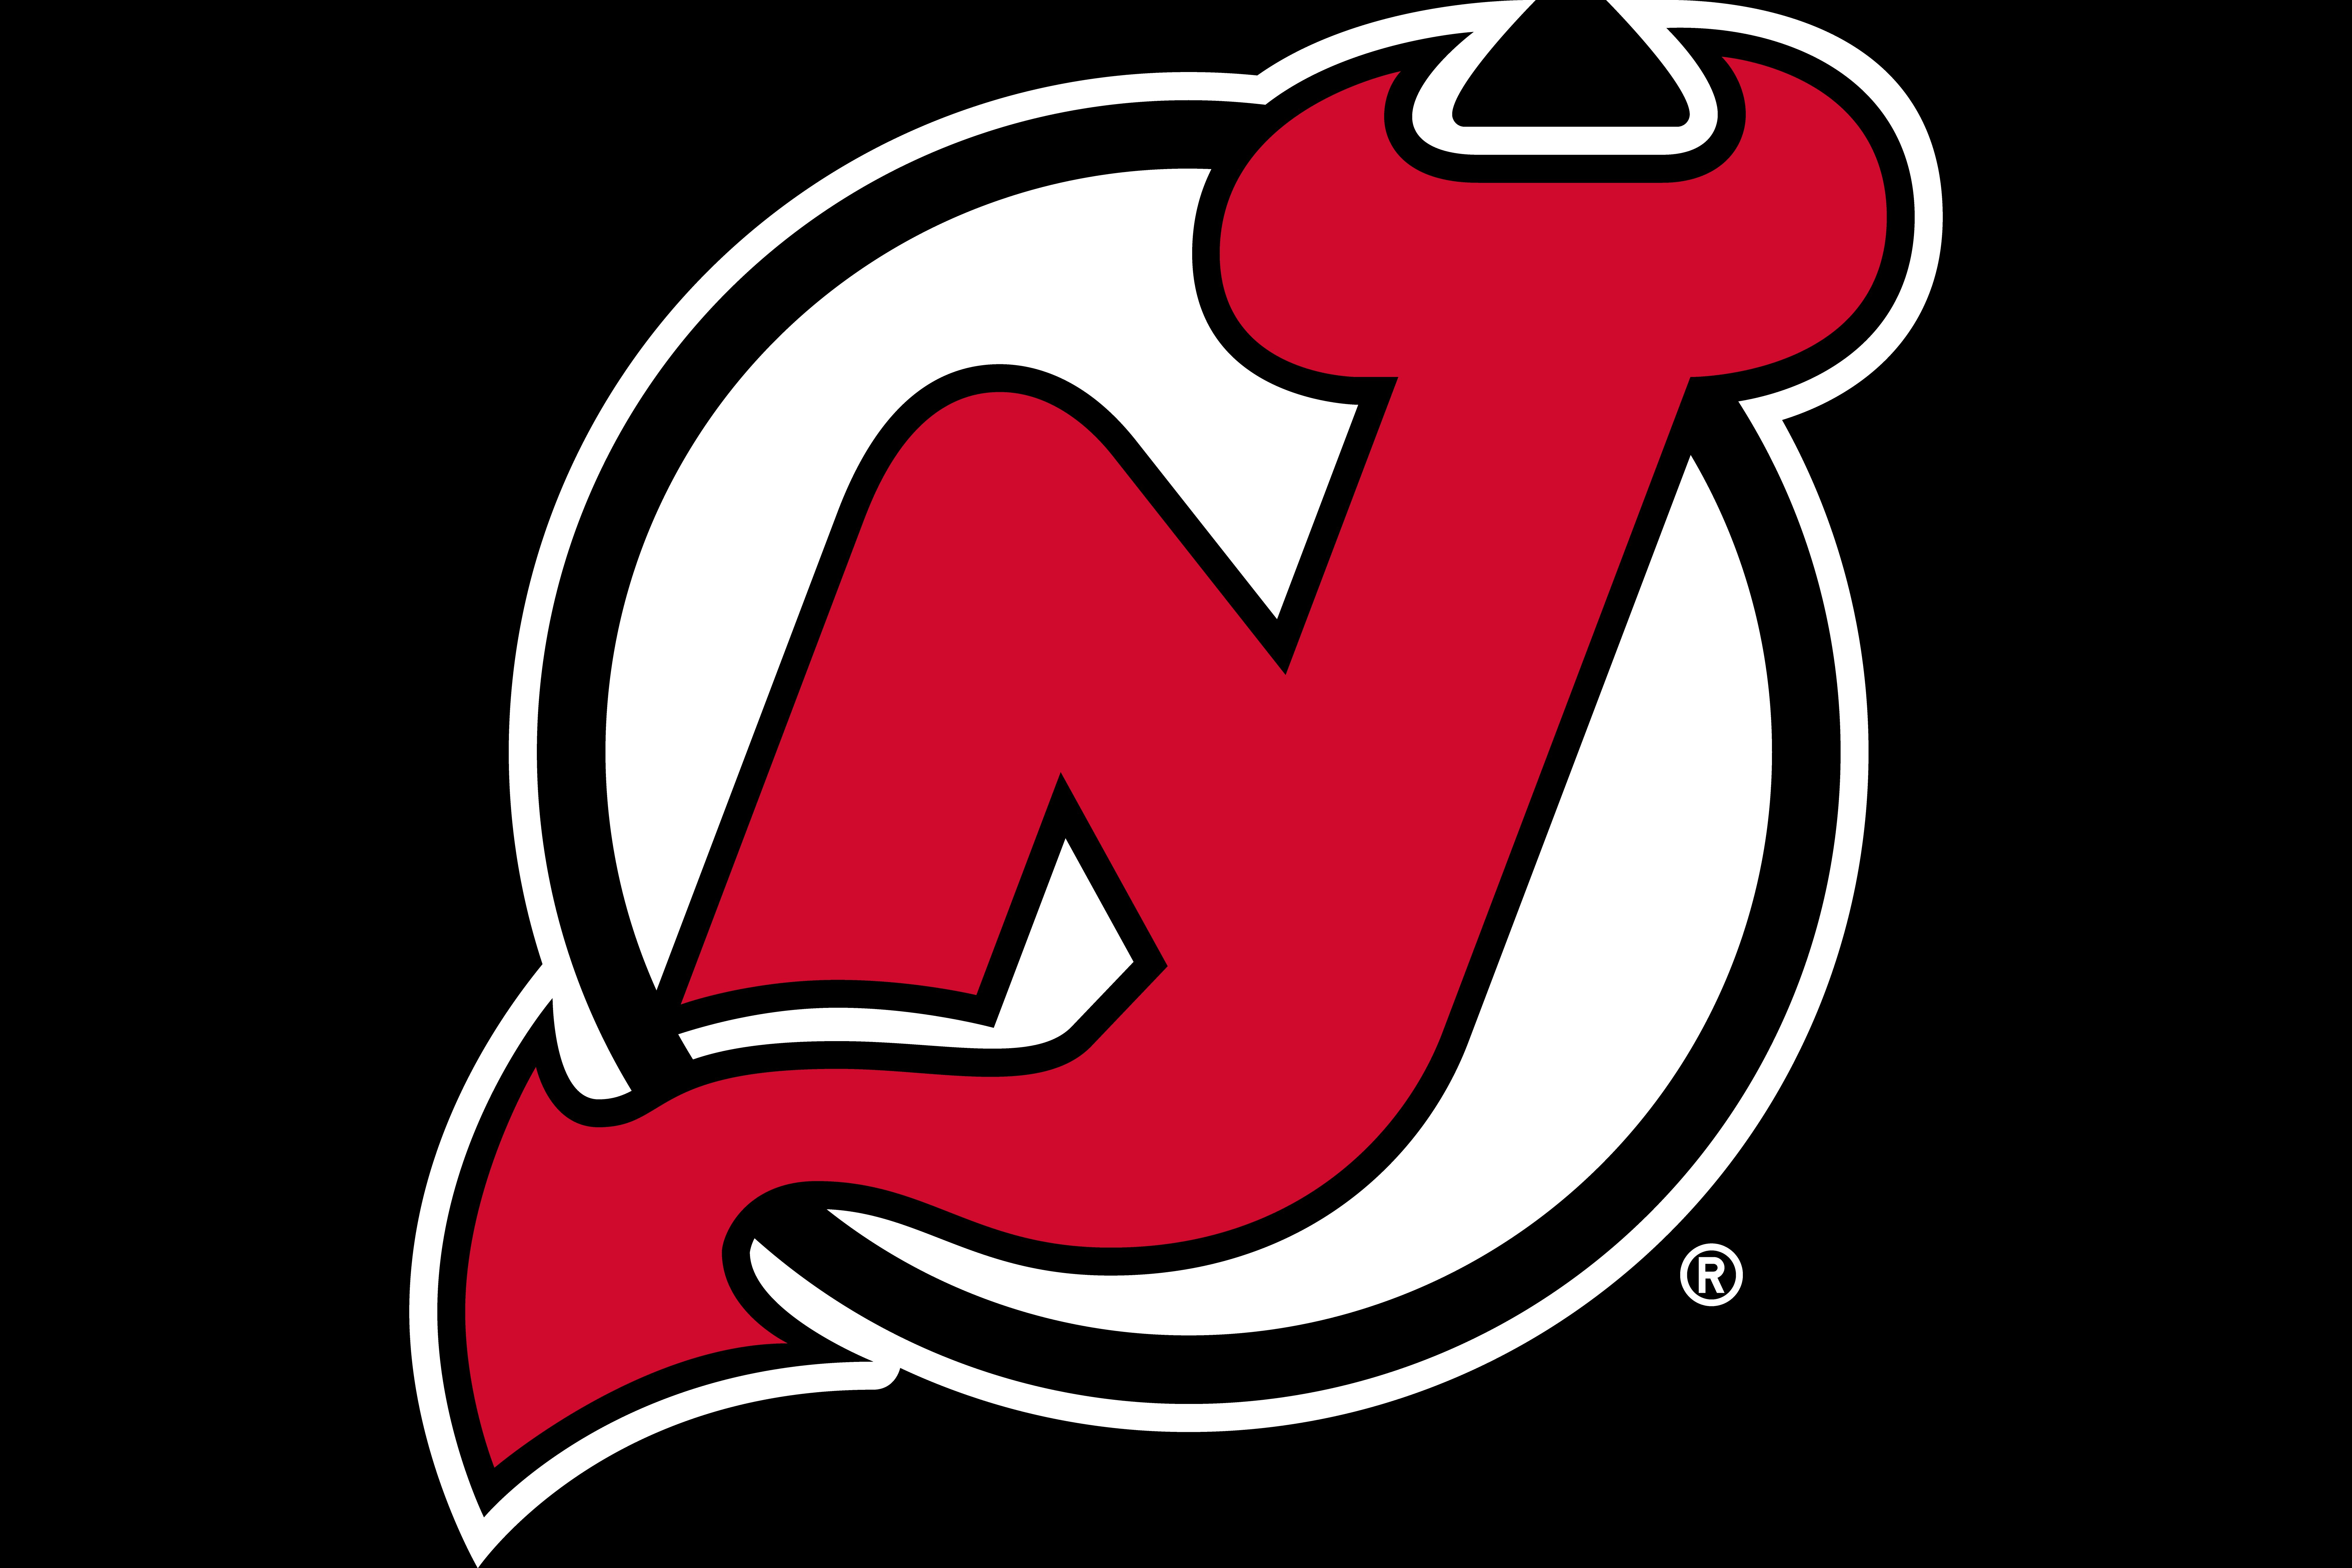 New jersey devils. Нью Девилс джерси Девилз. Хк Нью джерси логотип. Нью джерси Девилз лого. Эмблема хк Нью джерси Девилз.